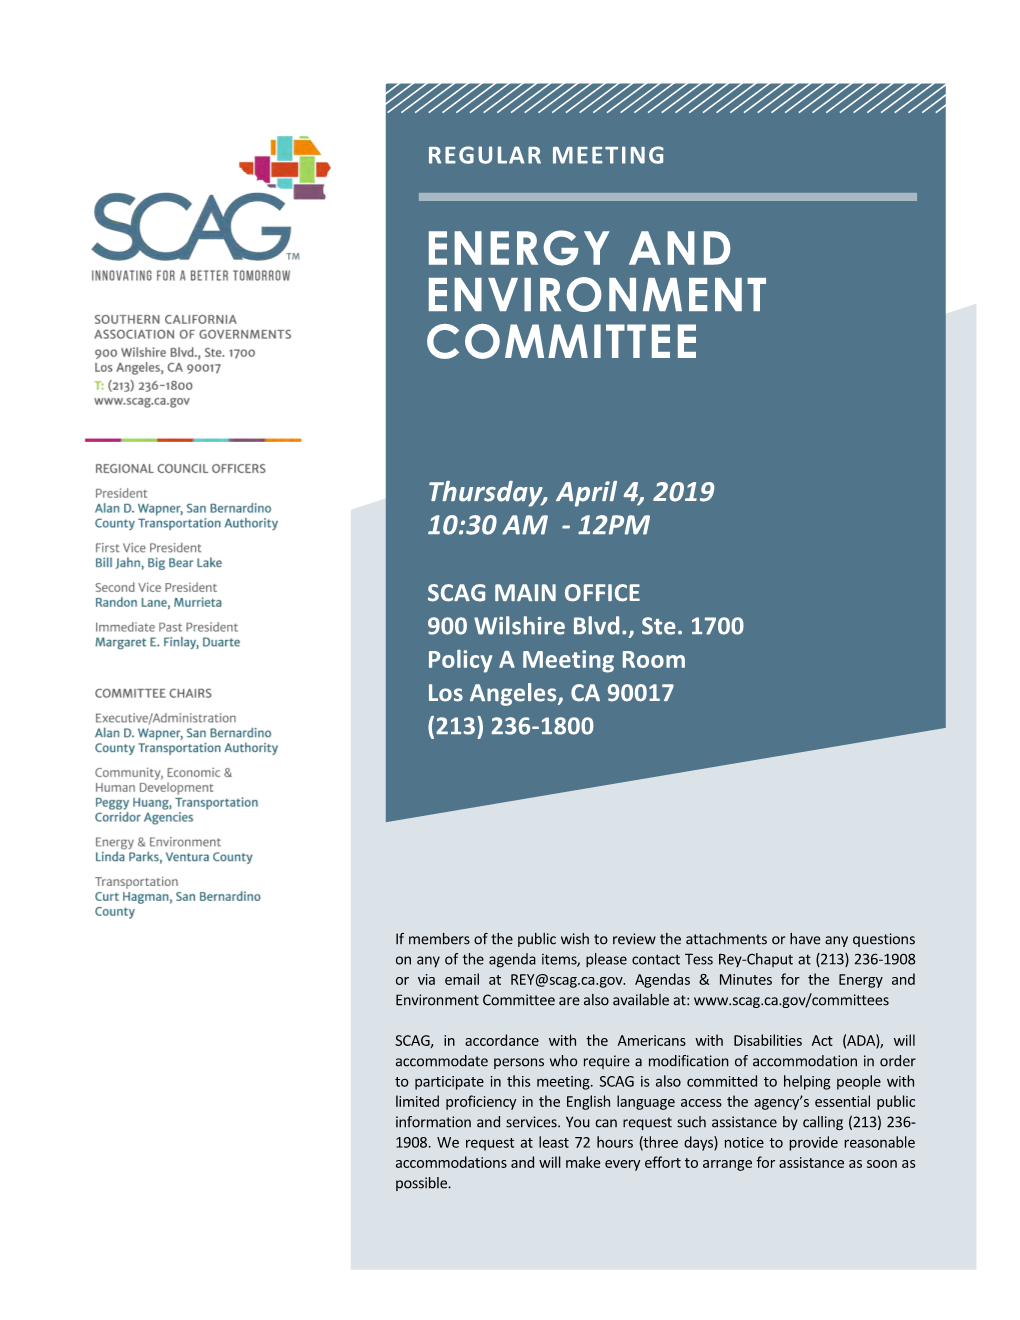 Energy and Environment Committee April 4, 2019 Full Agenda Packet